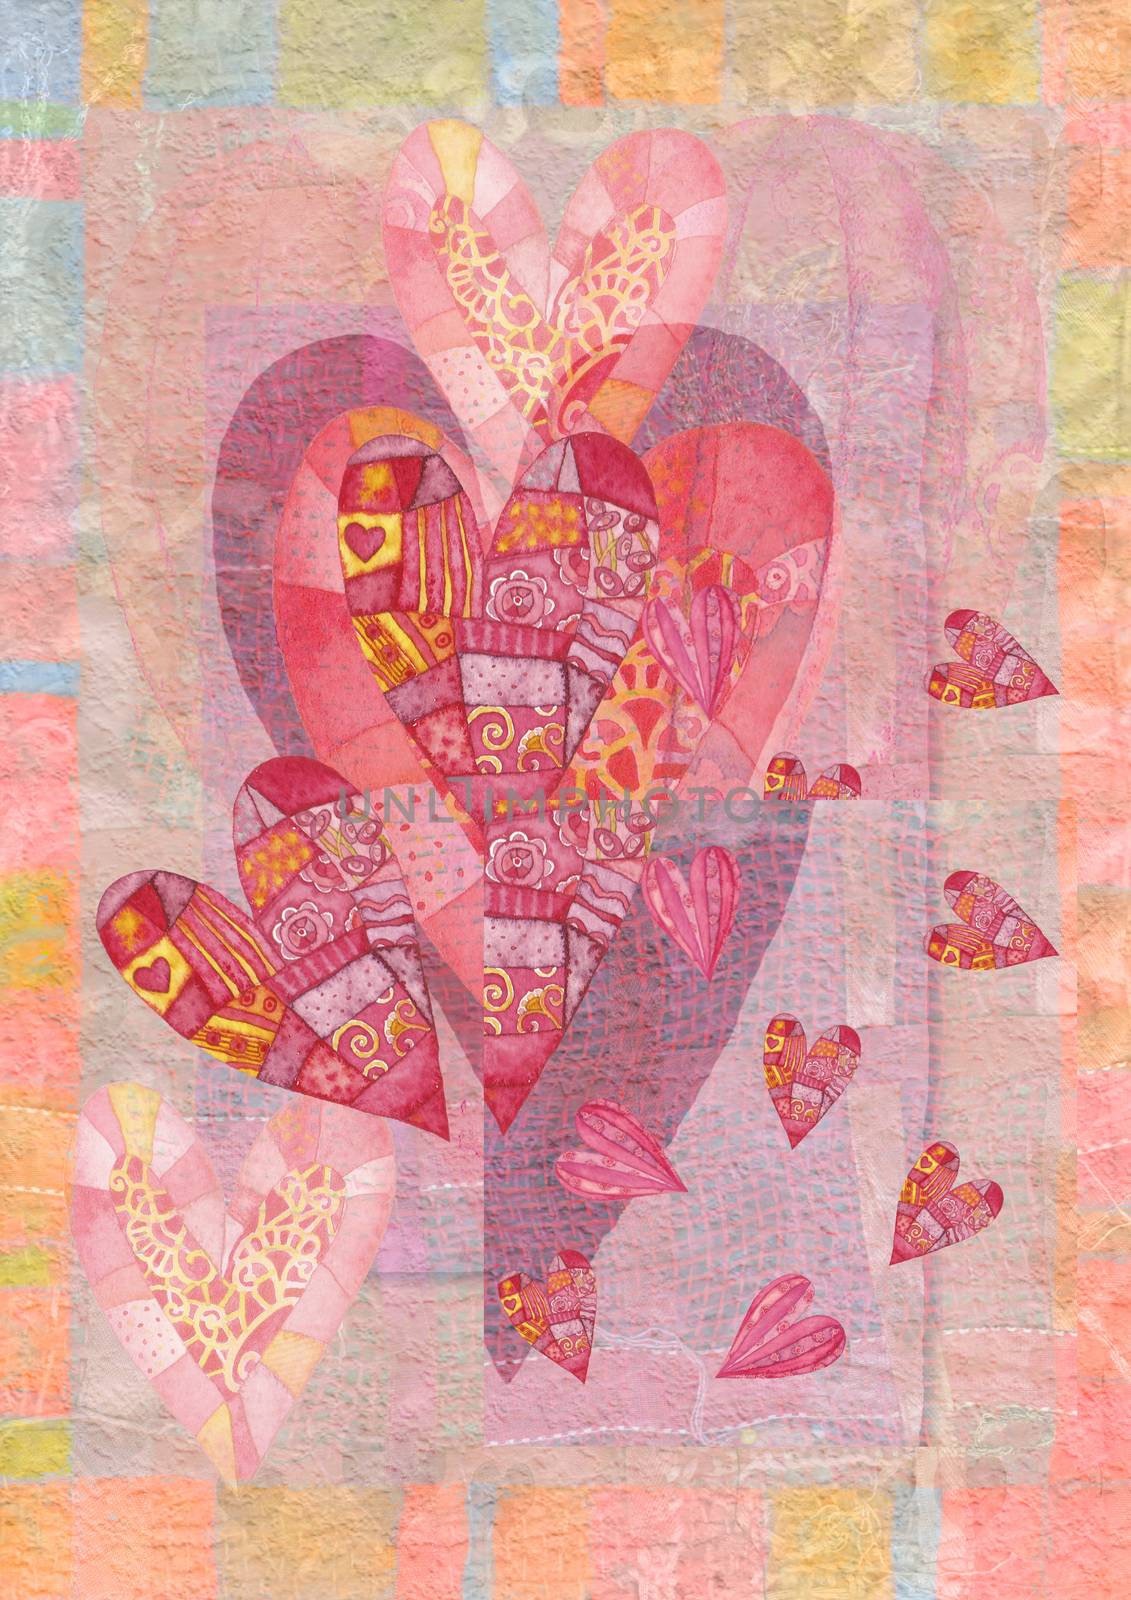 Heart, greeting card for Valentine's Day by vimasi